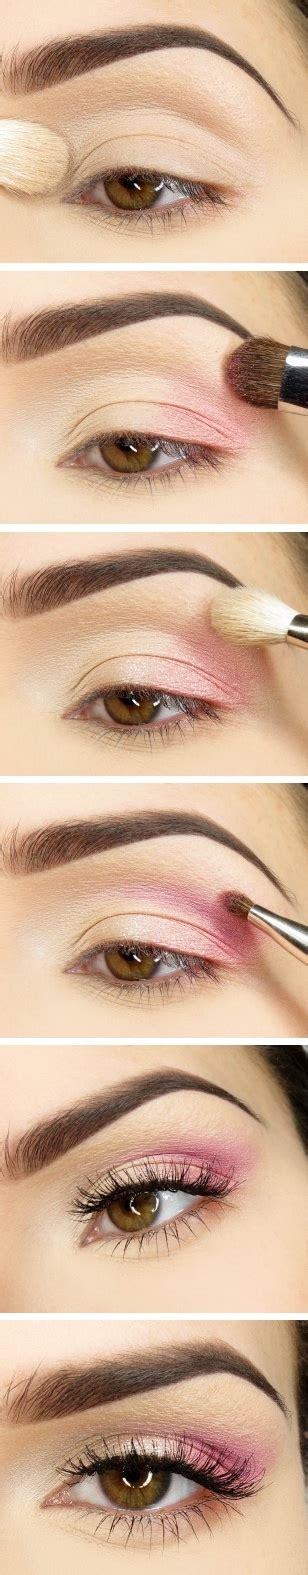 12 Sweet Makeup Ideas For Valentines Day Pretty Designs